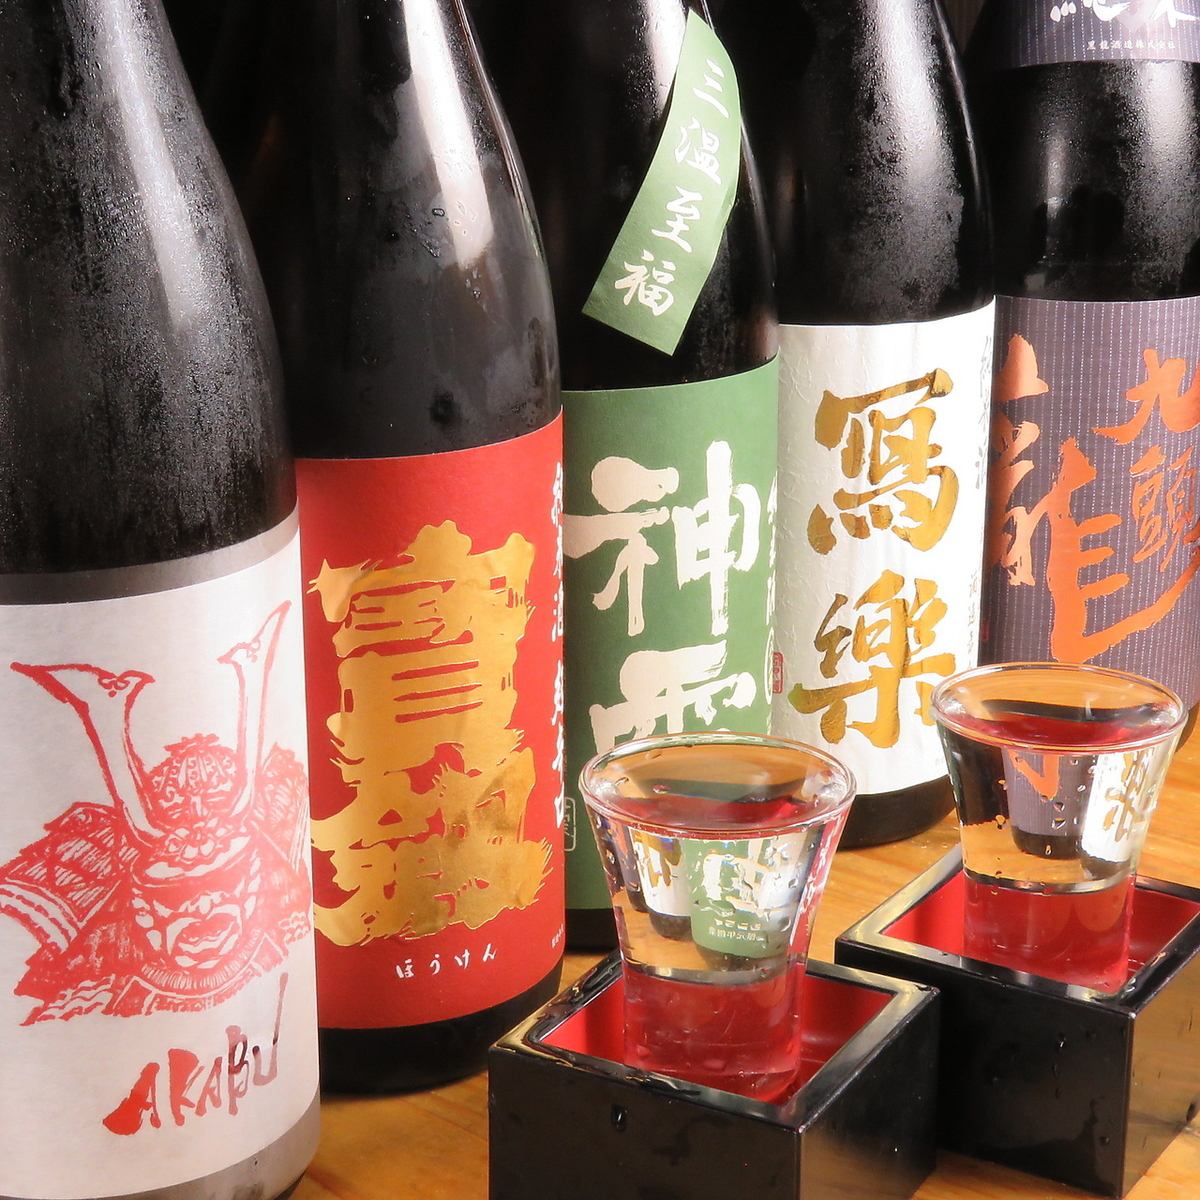 Premium all-you-can-drink for 2 hours 2000 yen can also drink sake !!